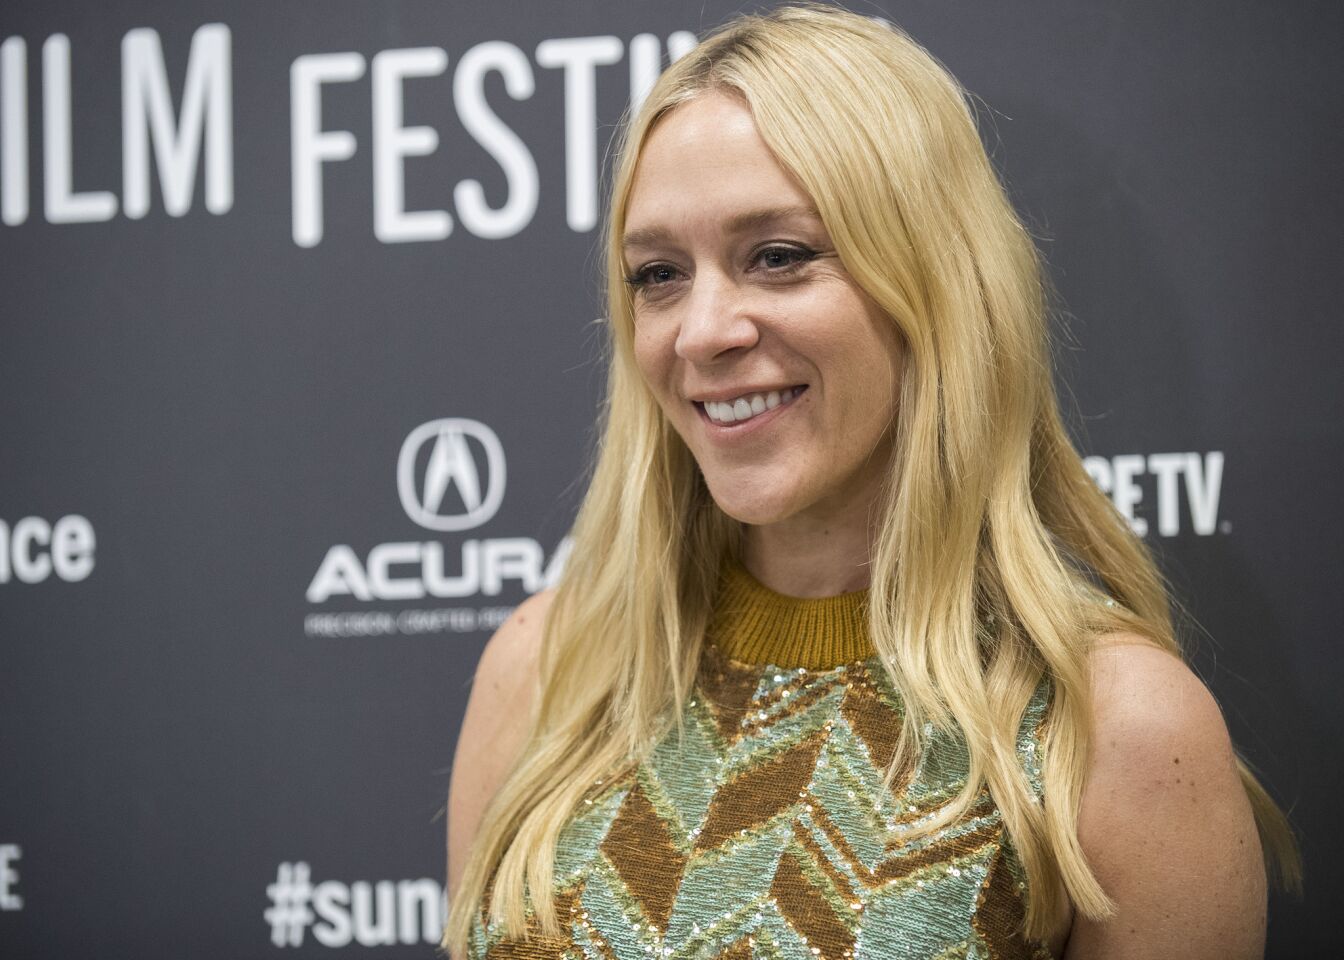 Actress Chloe Sevigny at the premiere of the film "Beatriz at Dinner" at the Eccles Theatre.